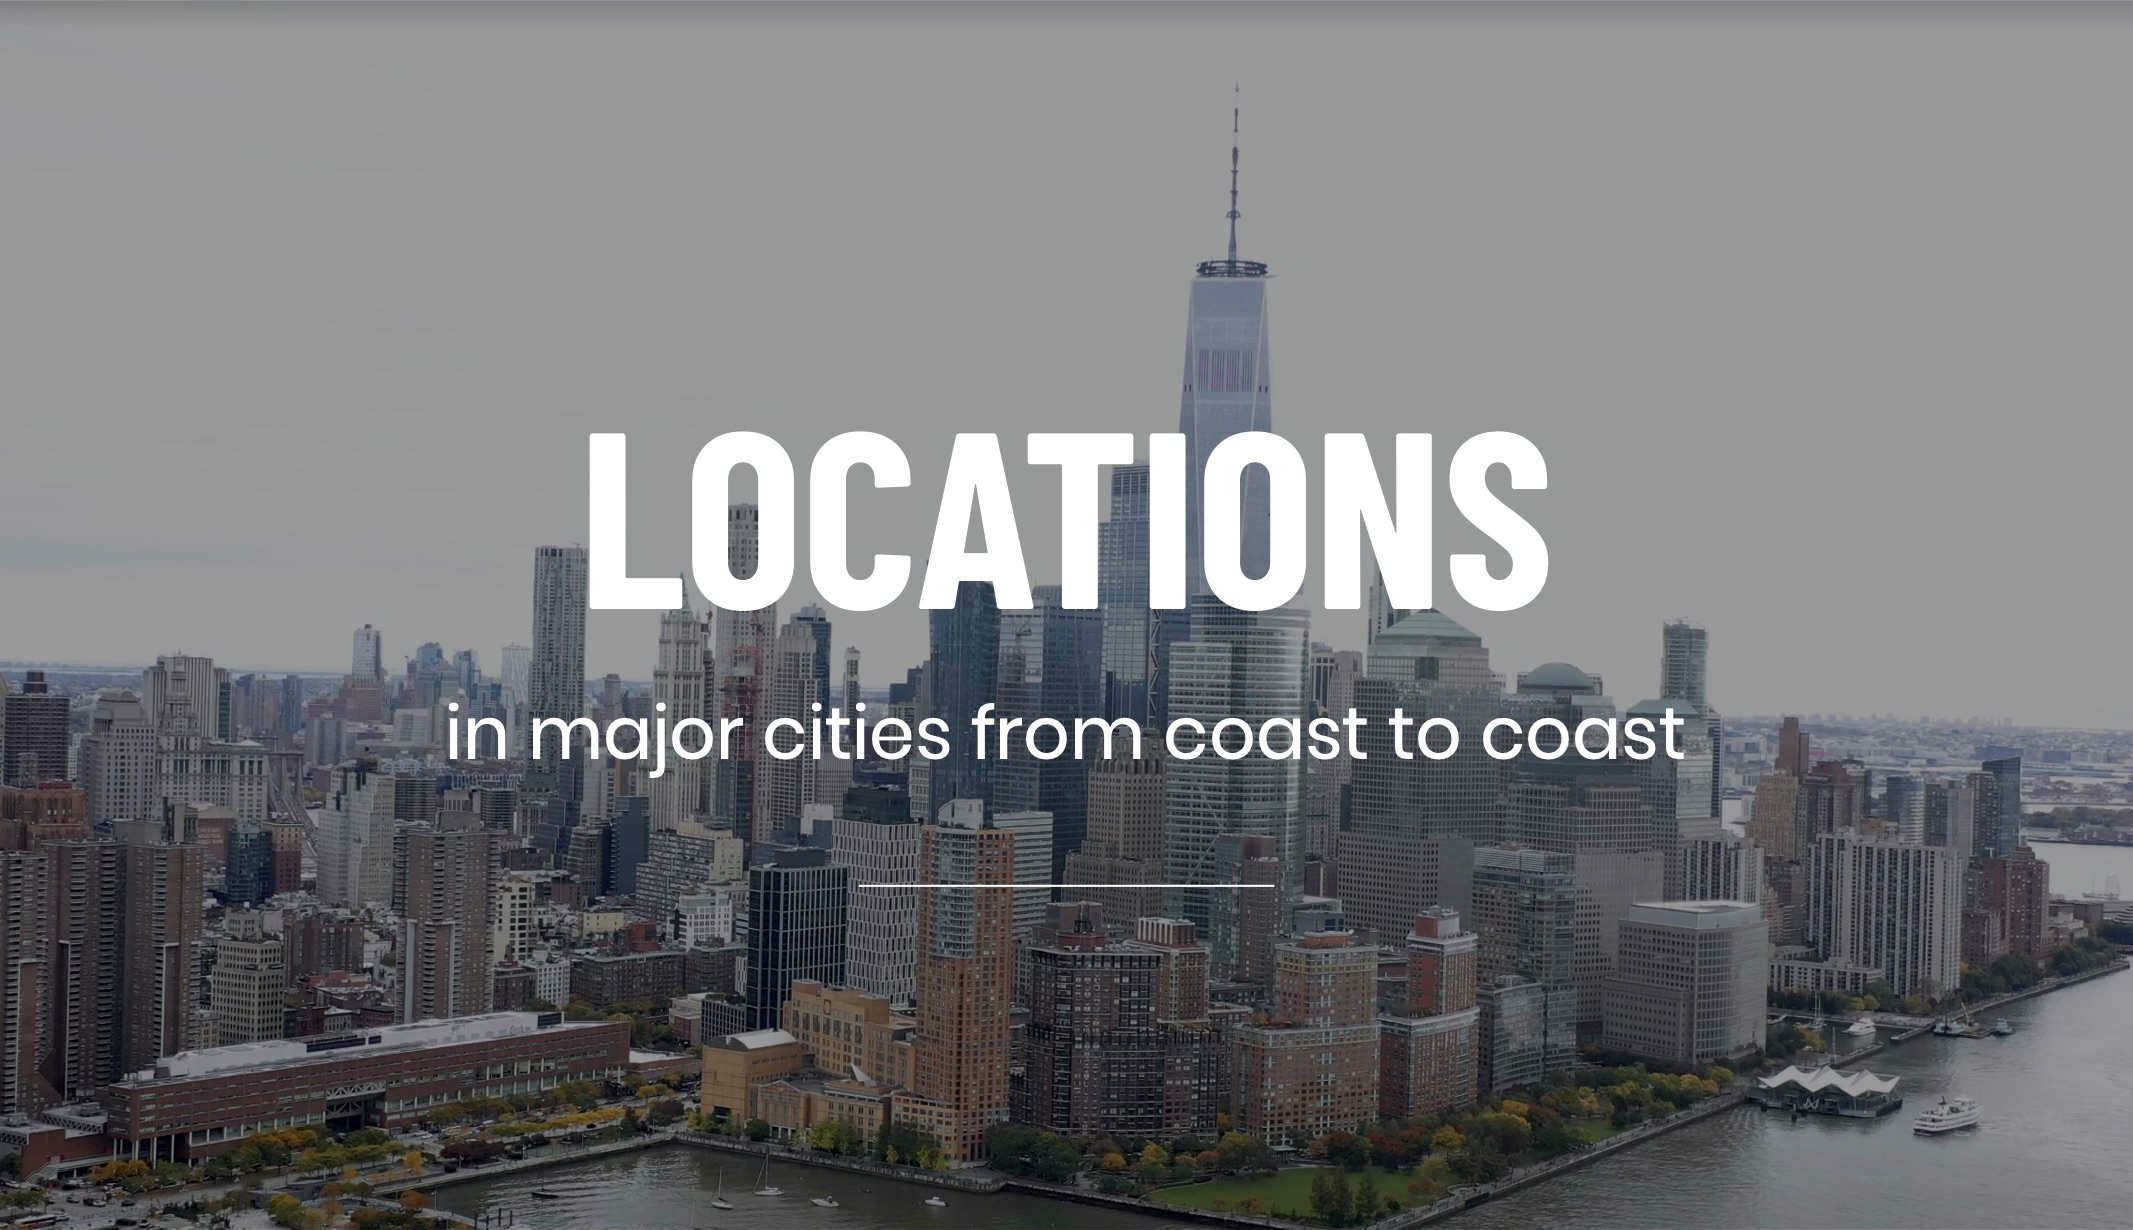 Production Resources White Locations in major cities from coast to coast title with backdrop of city